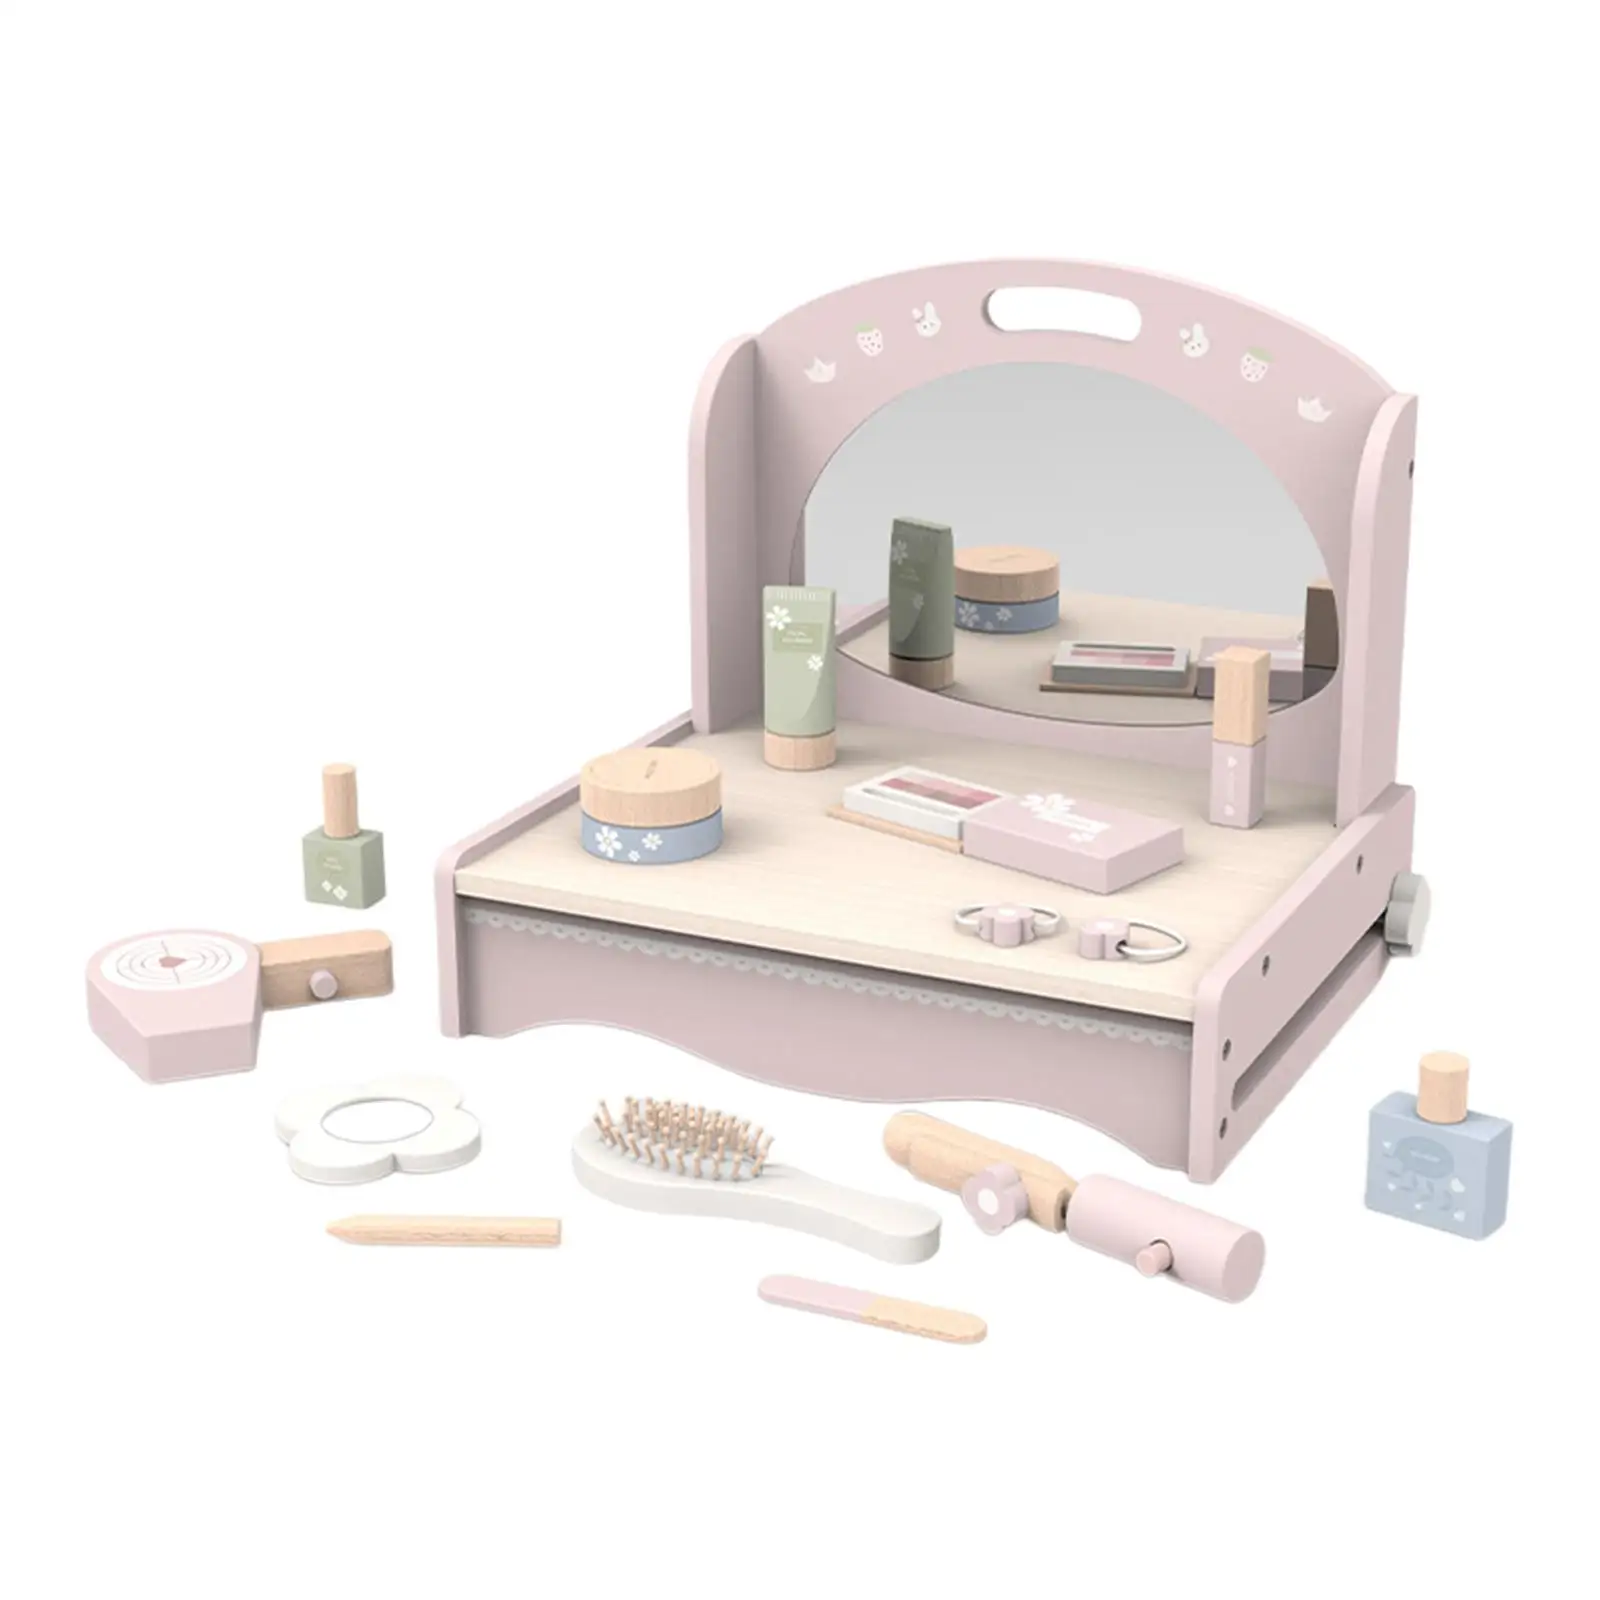 Wooden dress Table Toy with Pretend Makeup Accessories for Role Play